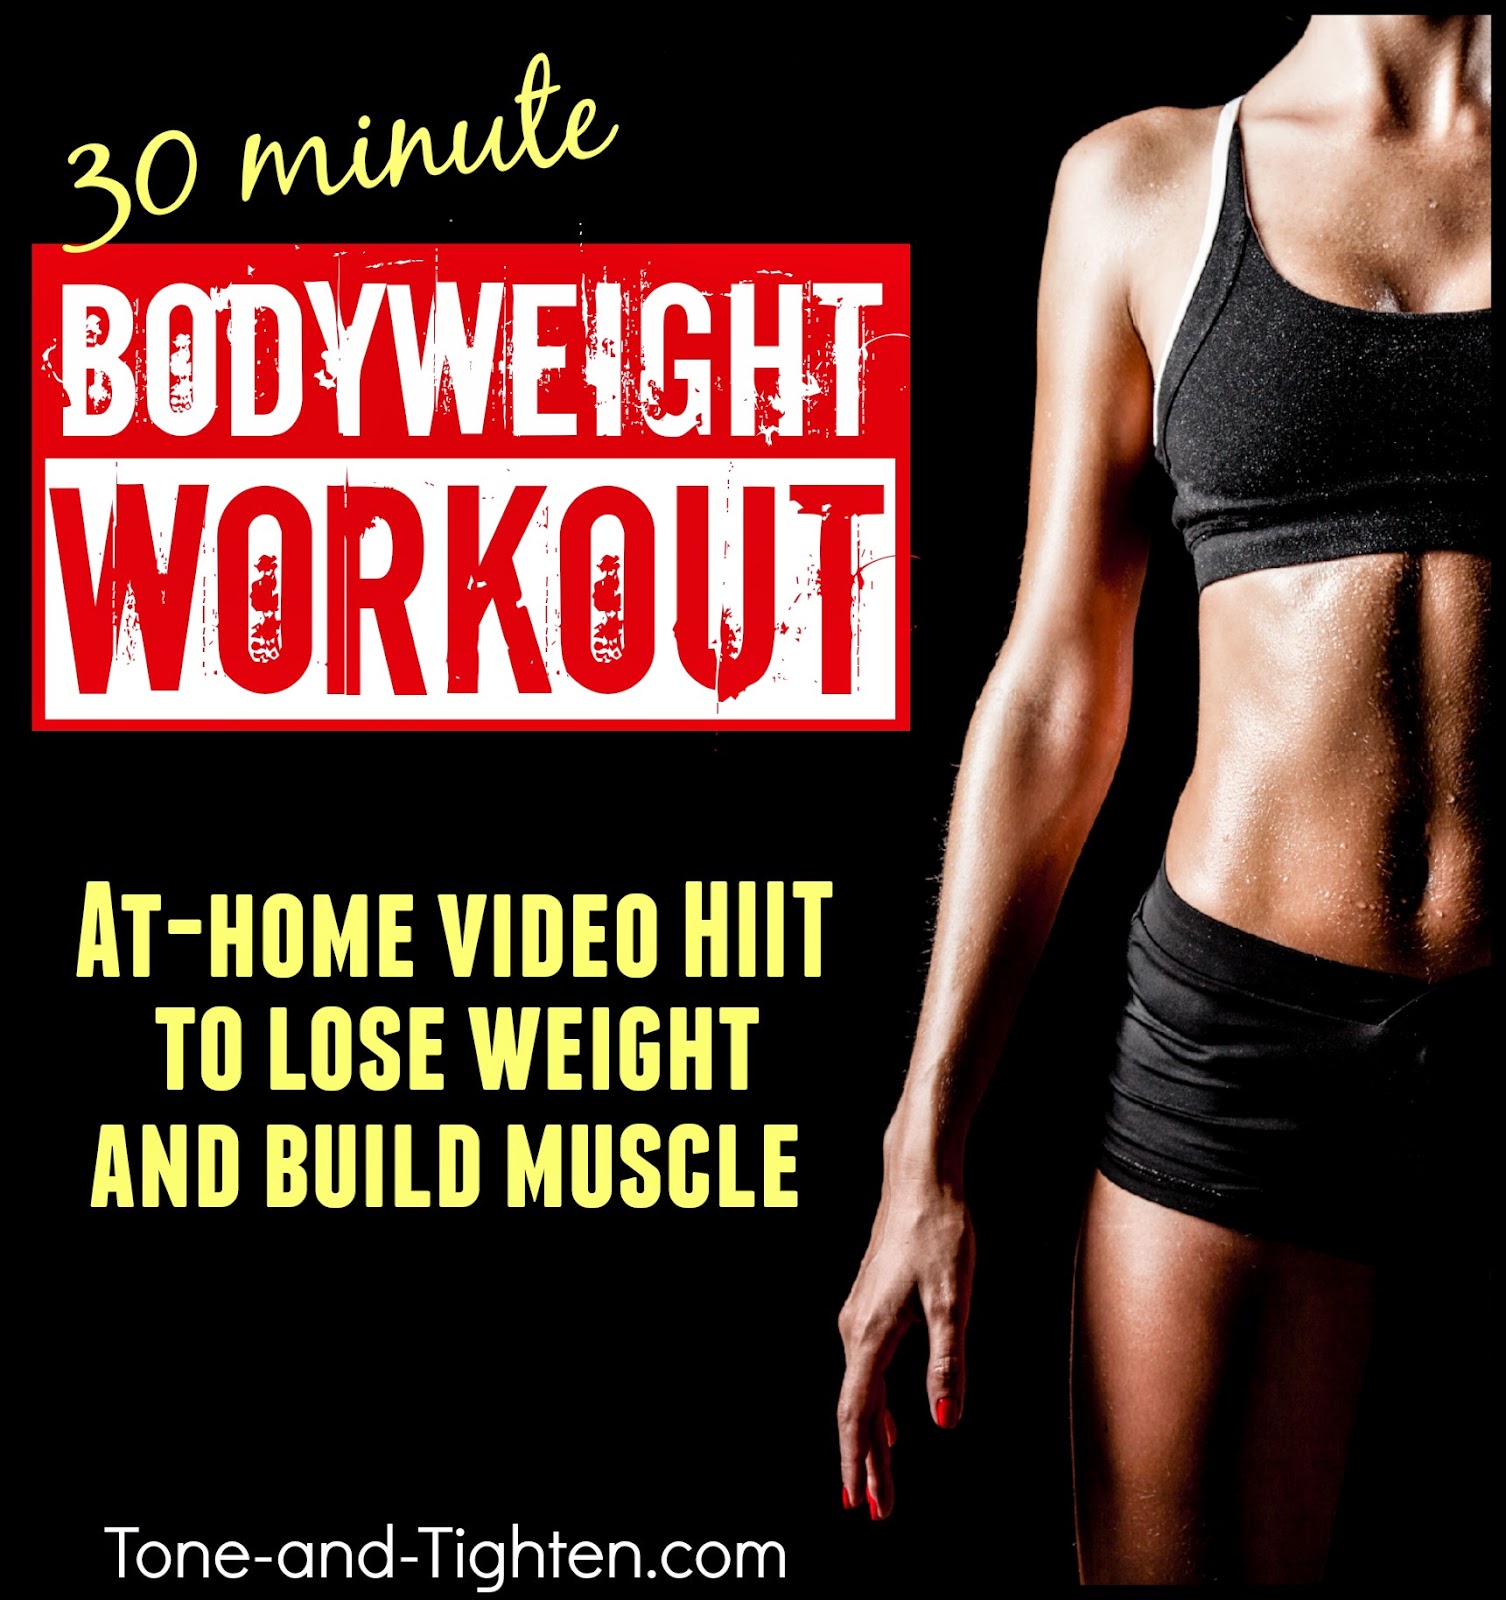 30 minute at-home bodyweight cardio workout – YouTube freebie with Tony Horton